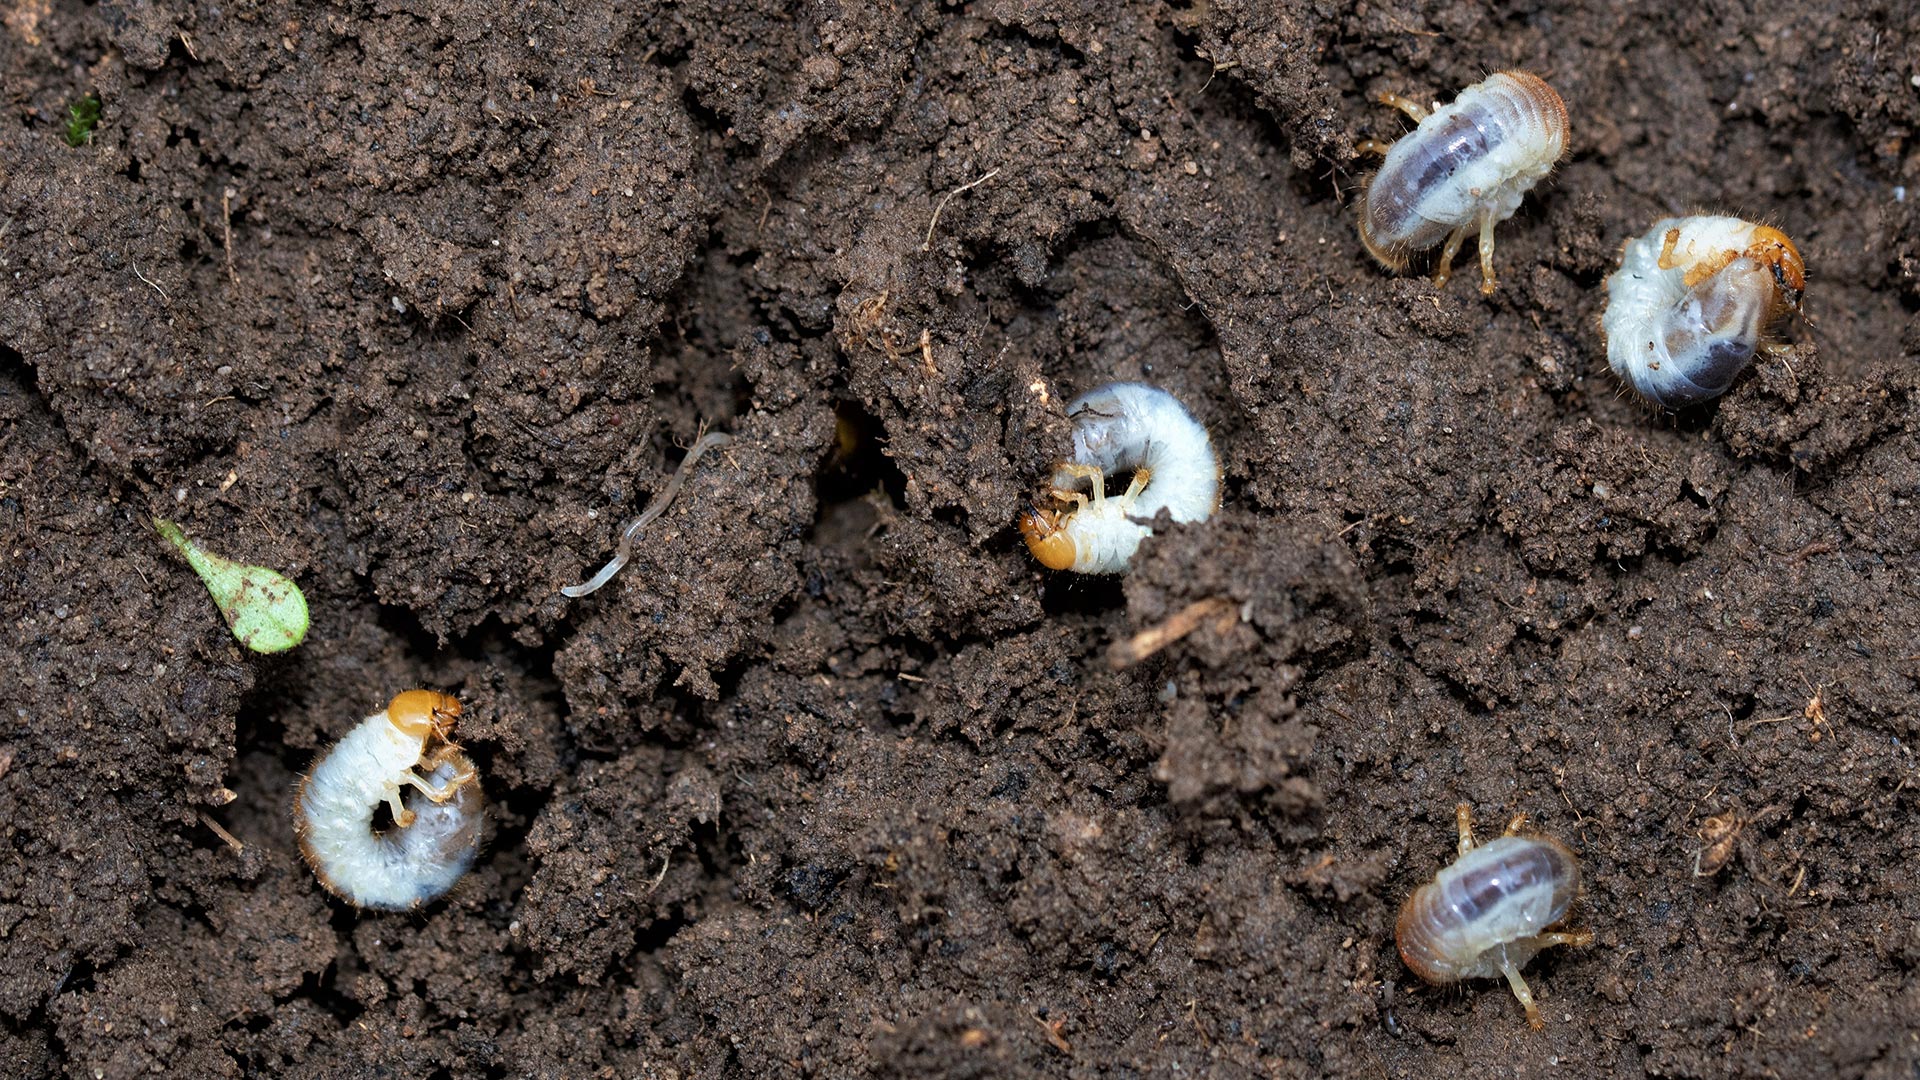 Don’t Take Your Chances - Avoid Grub Damage With a Preventative Treatment